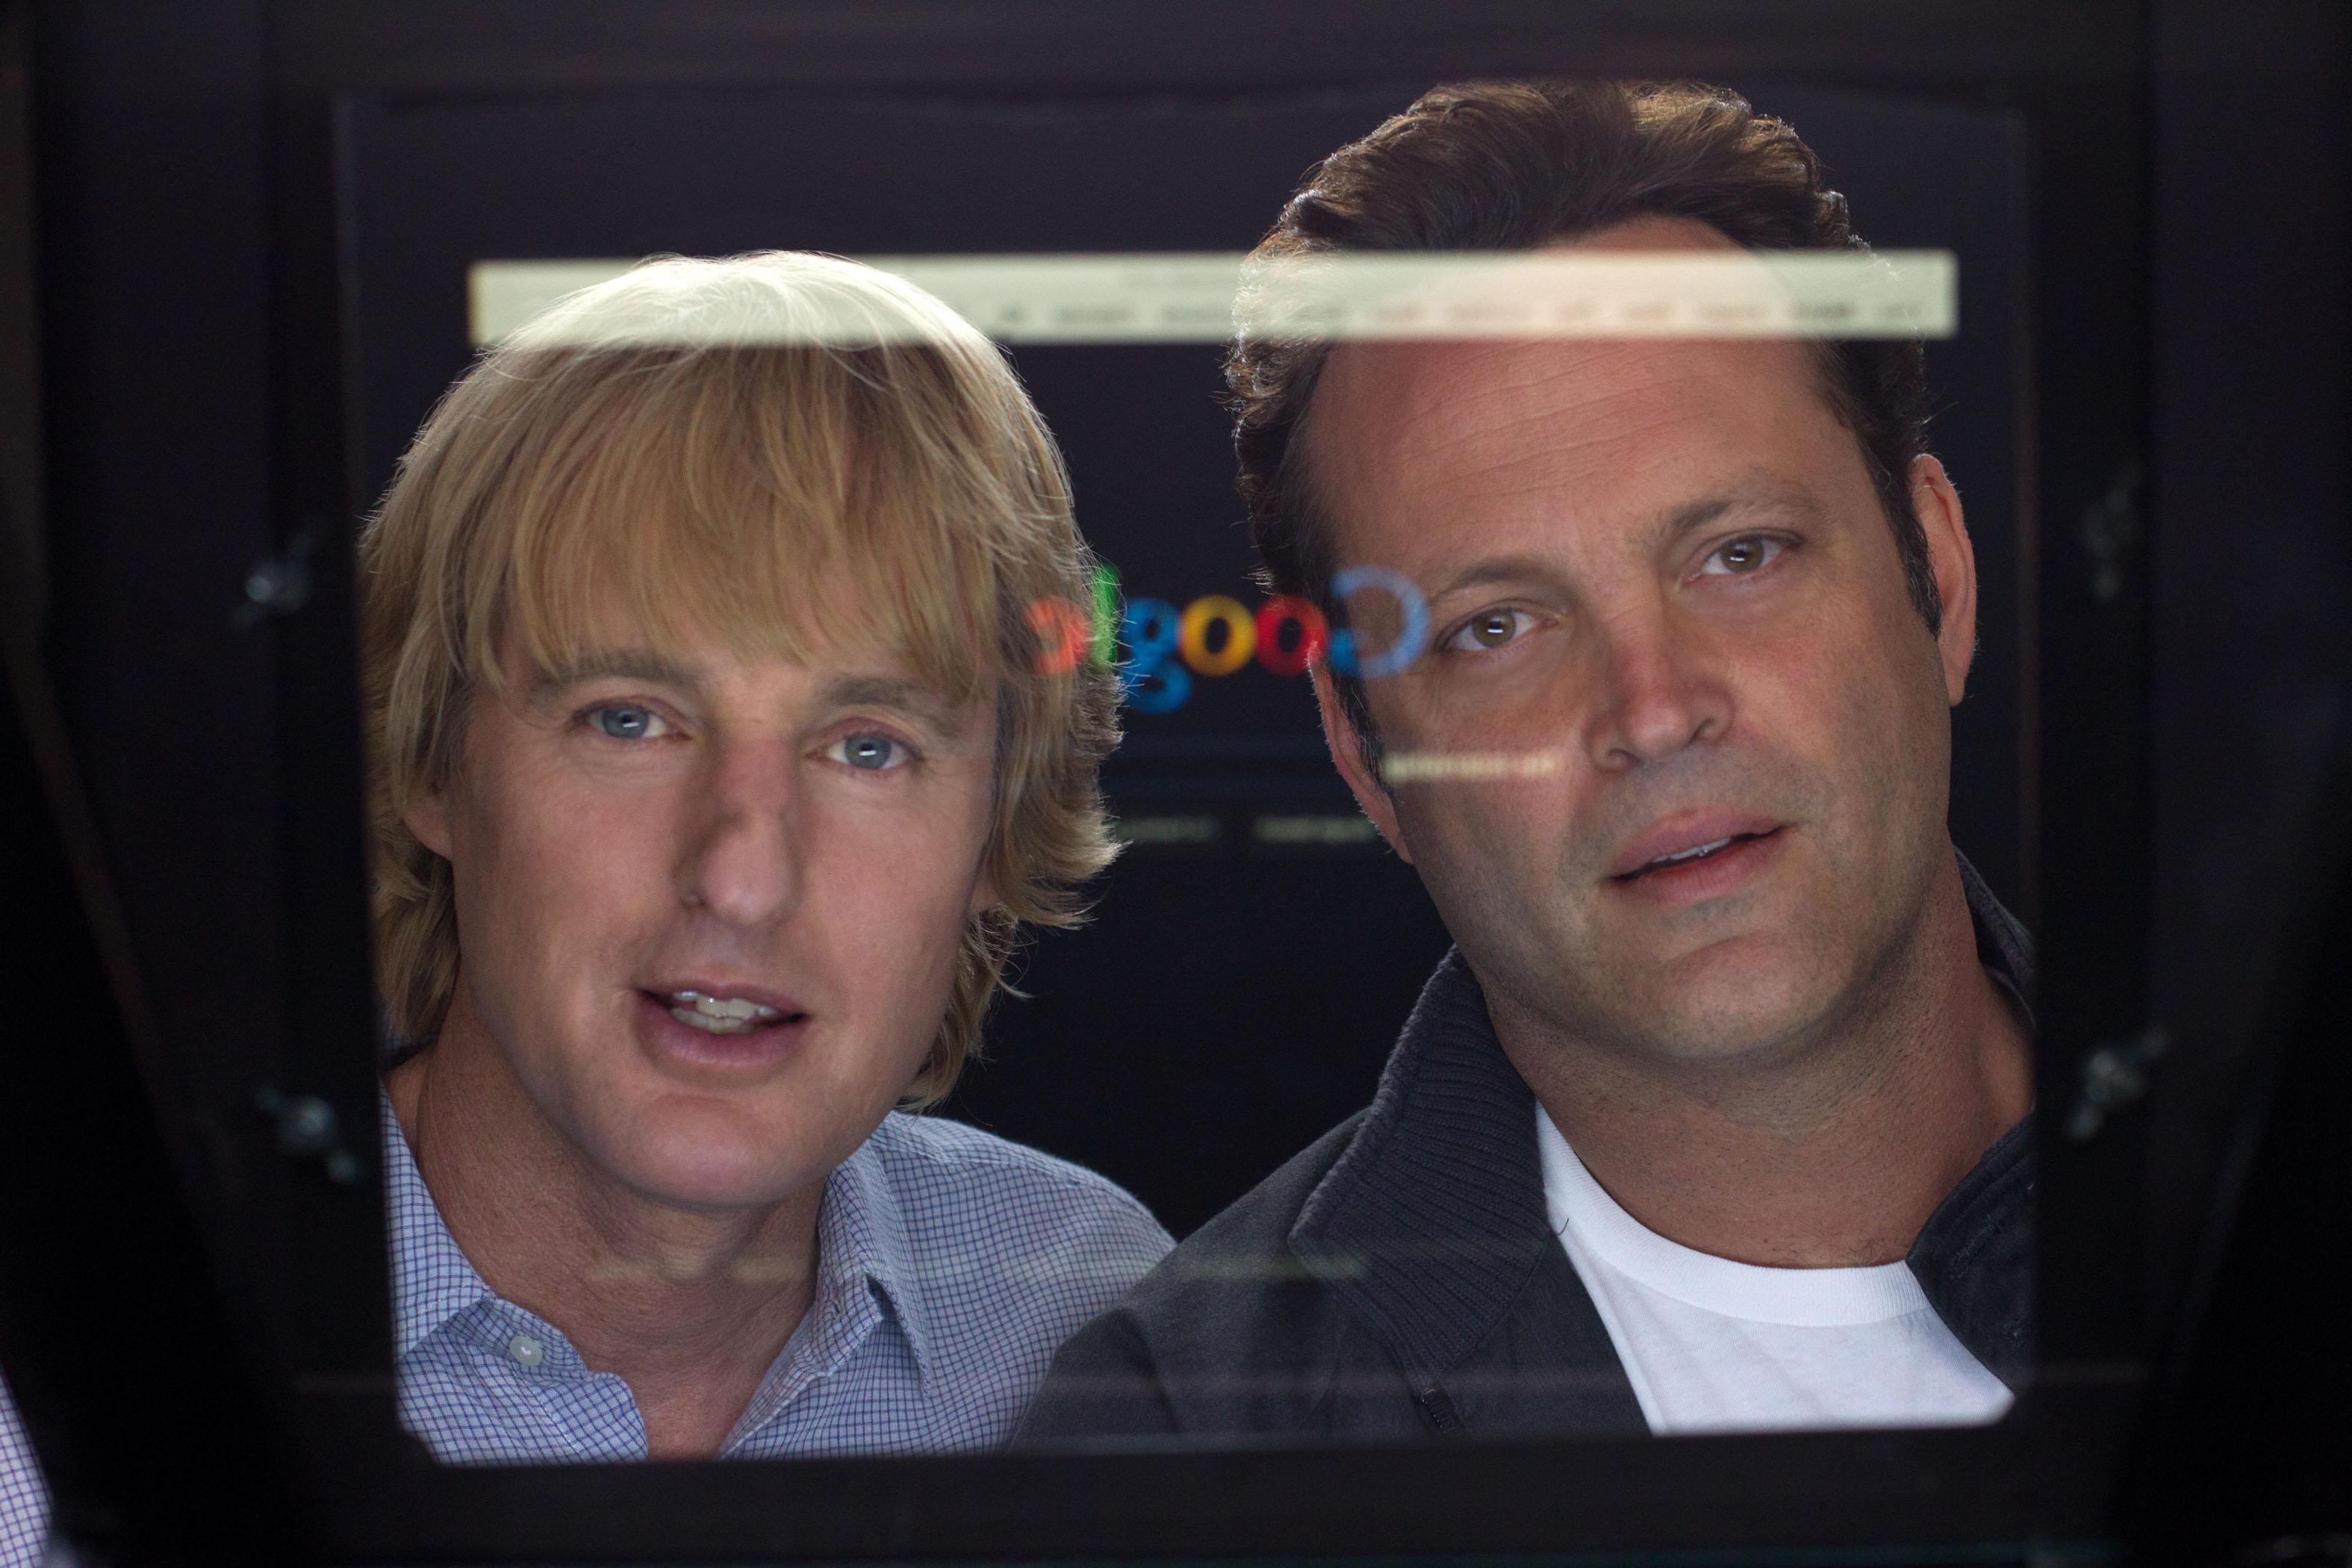 Owen Wilson and Vince Vaughn star in "The Internship," here reviewed by film critic Danny Baldwin.